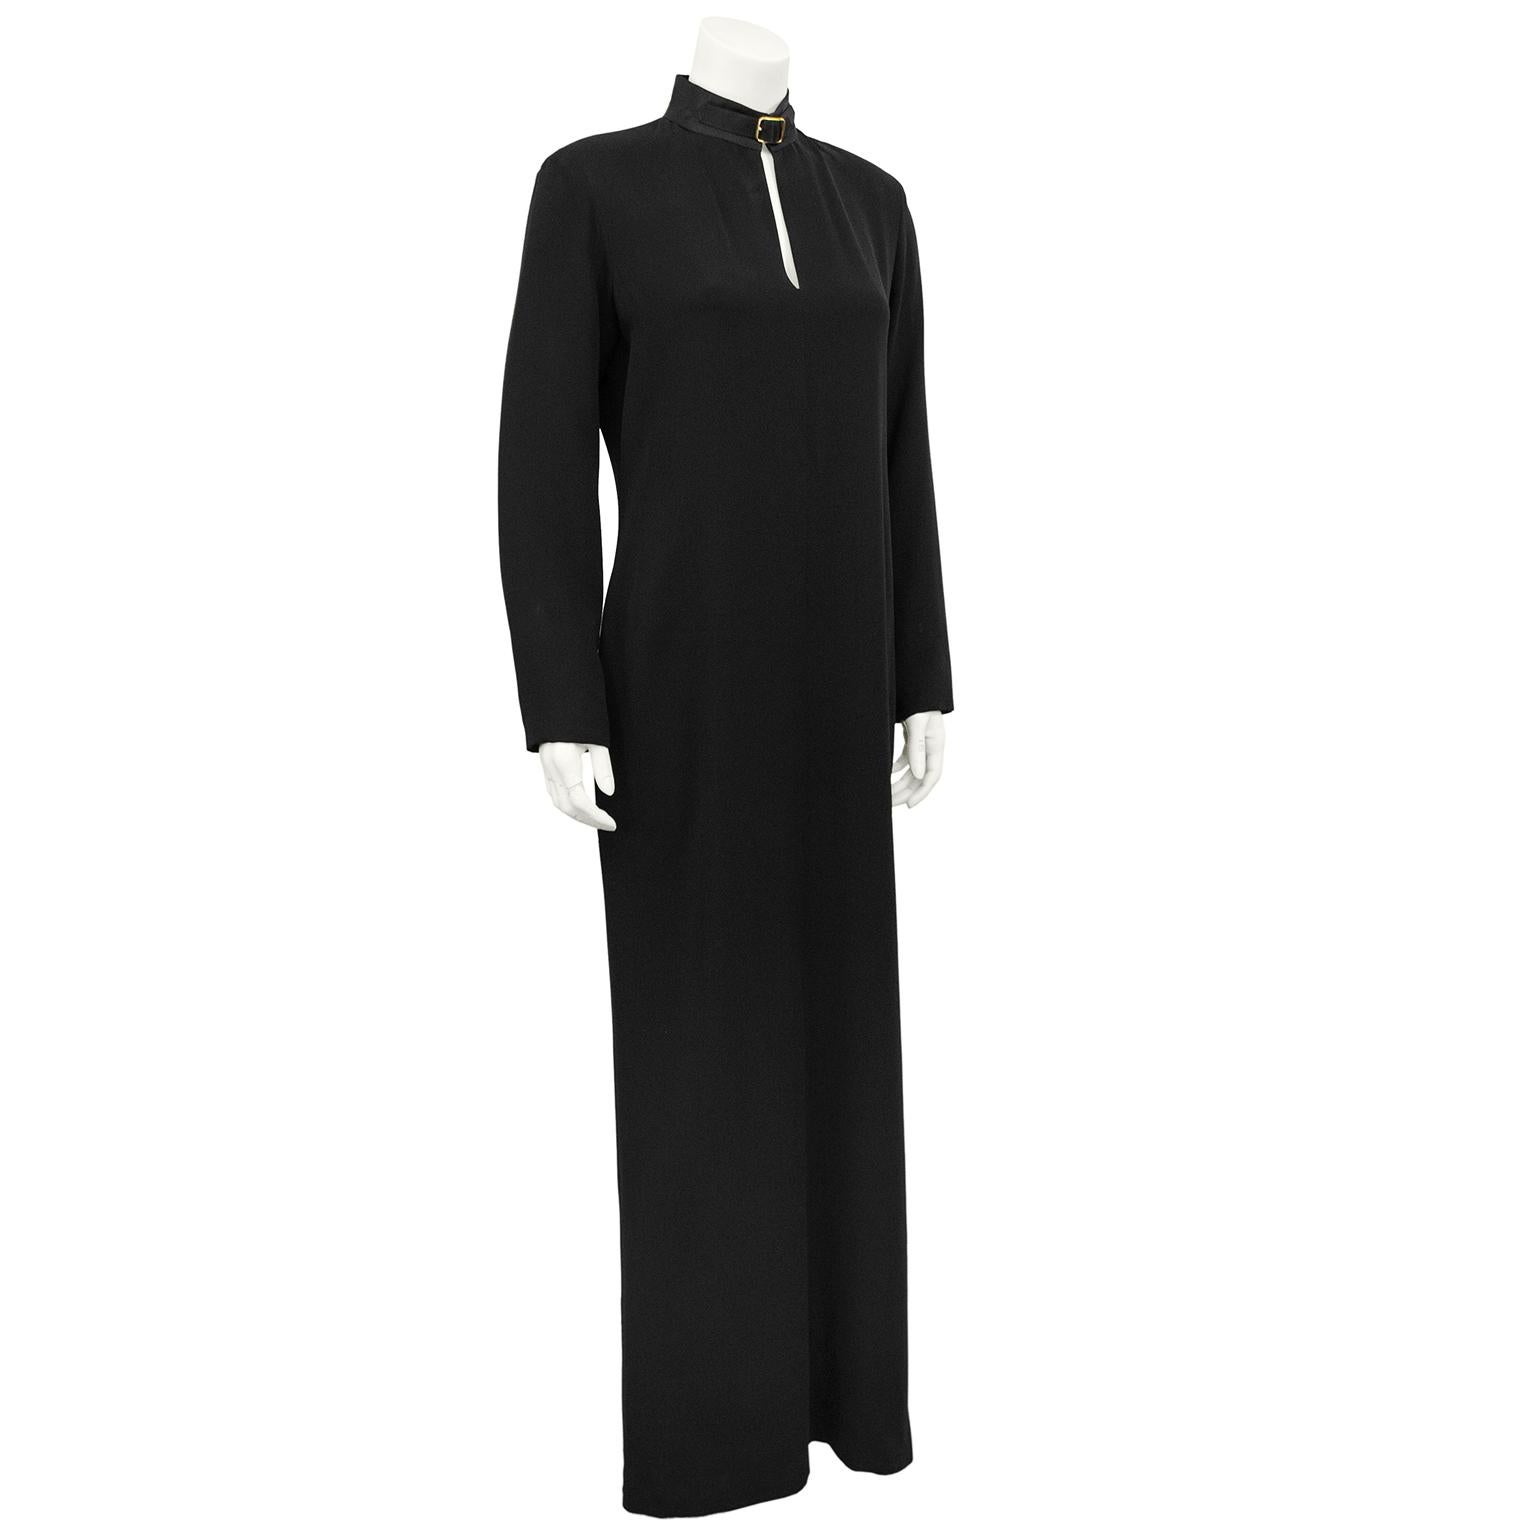 Sleek and stunning long sleeve black silk crepe Ralph Lauren Purple label gown from the 1990s. Subtly contrasting black satin high collar with gold tone buckle detail and long key hole cut out. The contrast of the silk crepe and satin gives the gown